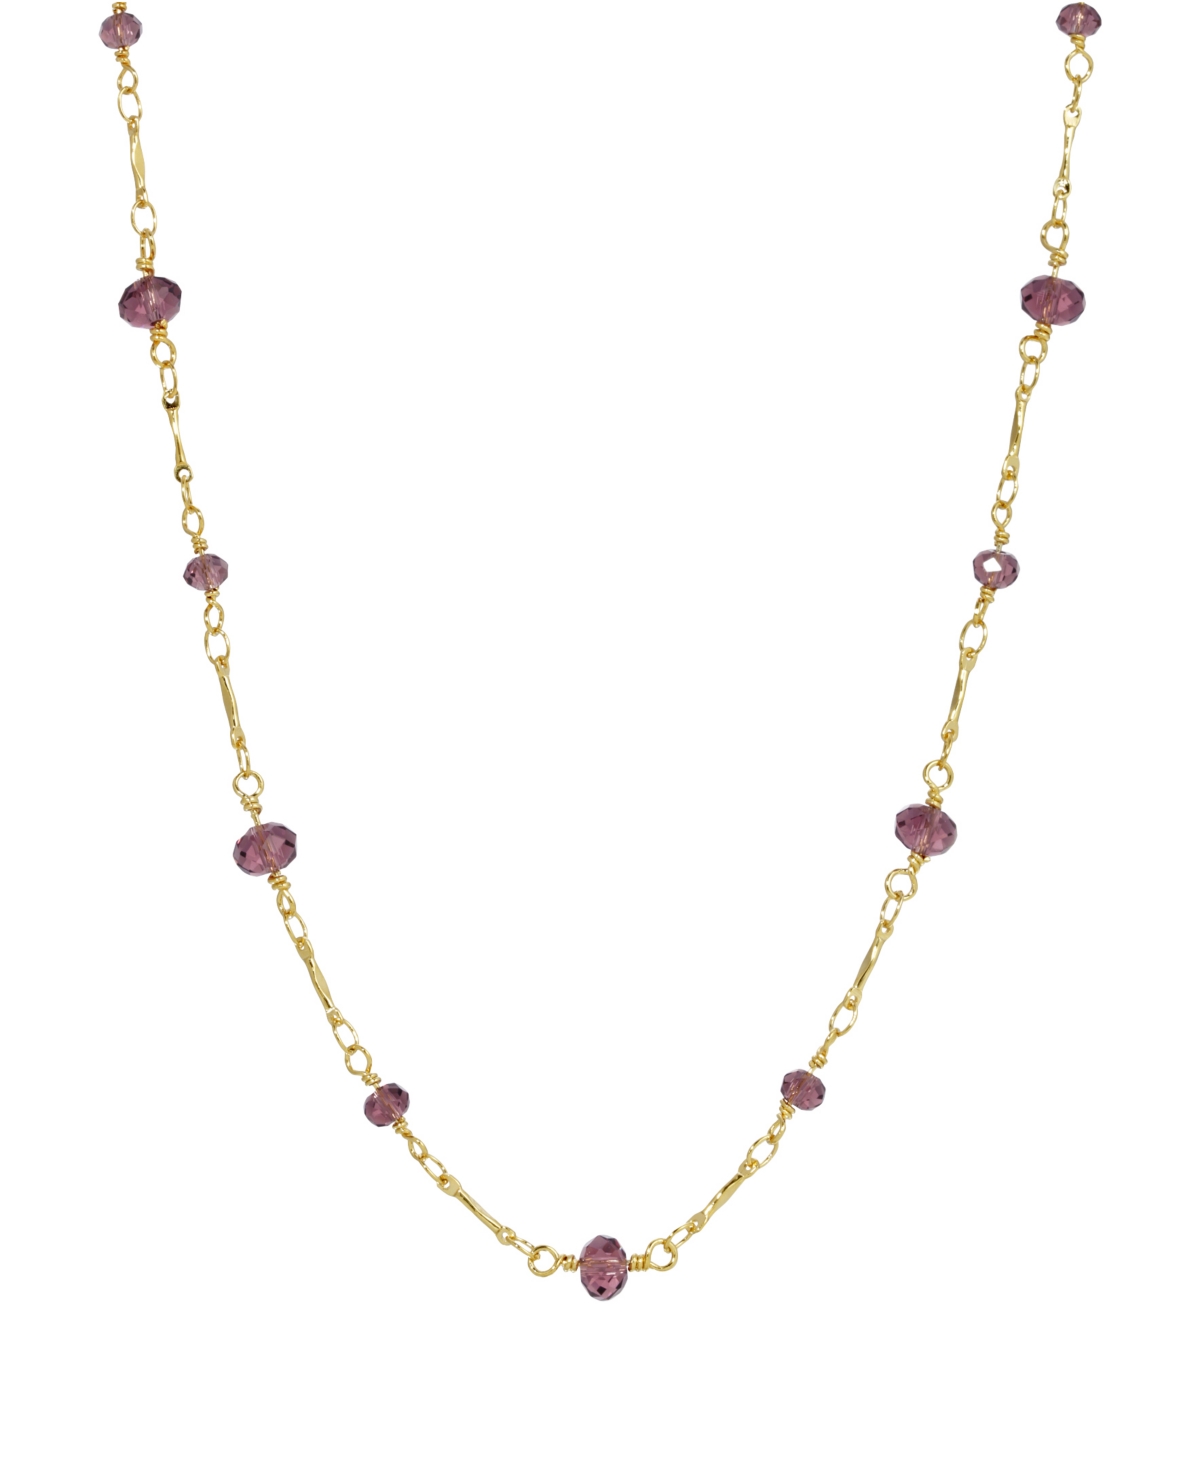 2028 Women's Gold Tone Purple Beaded Chain Necklace